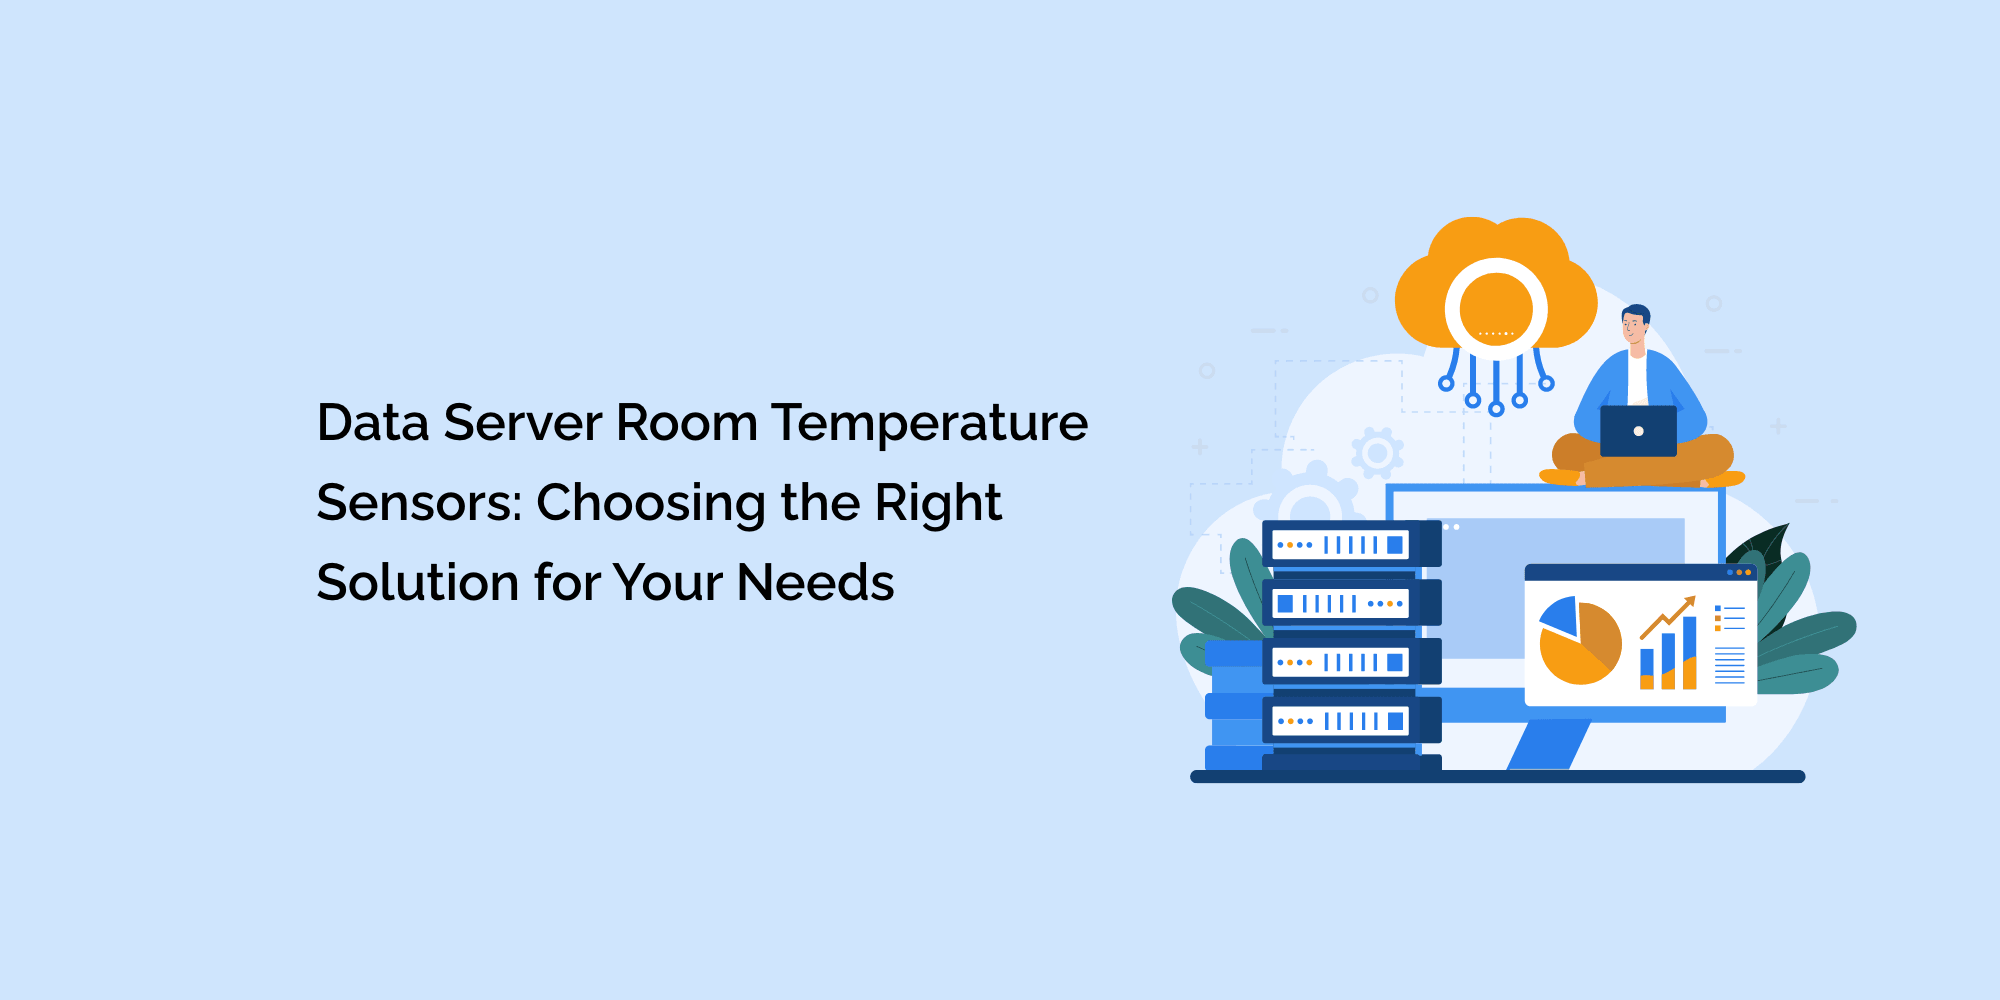 Data Server Room Temperature Sensors: Choosing the Right Solution for Your Needs